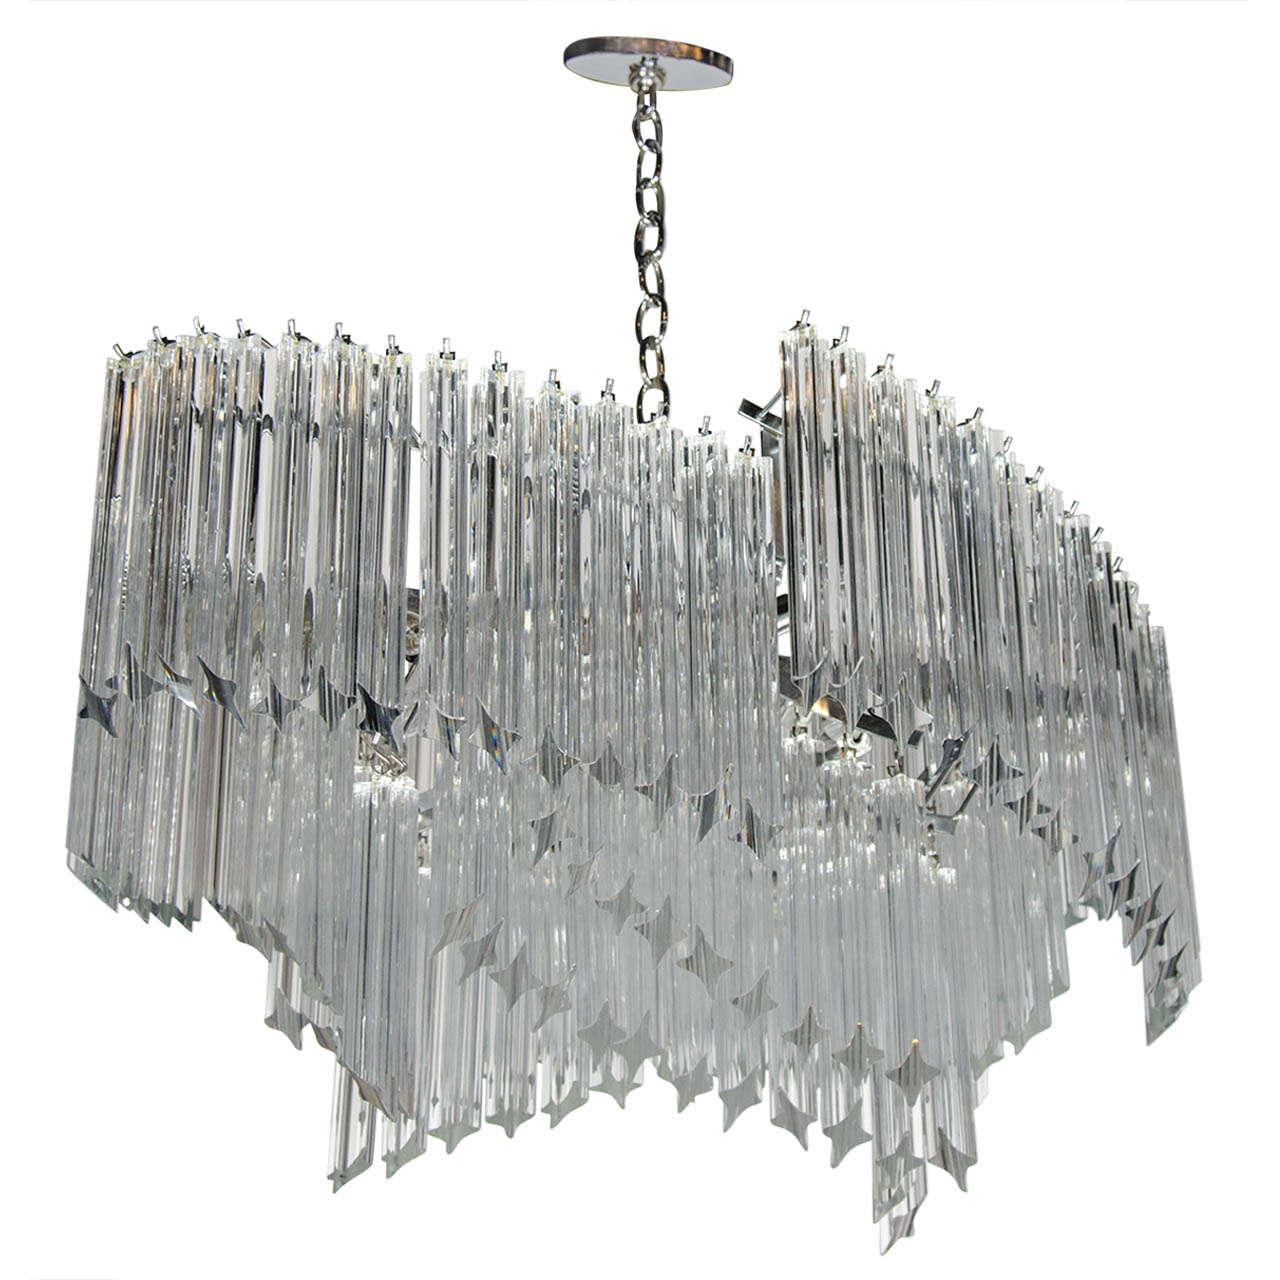 Mid-Century Modernist Asymmetrical Form Chandelier with Camer Crystals